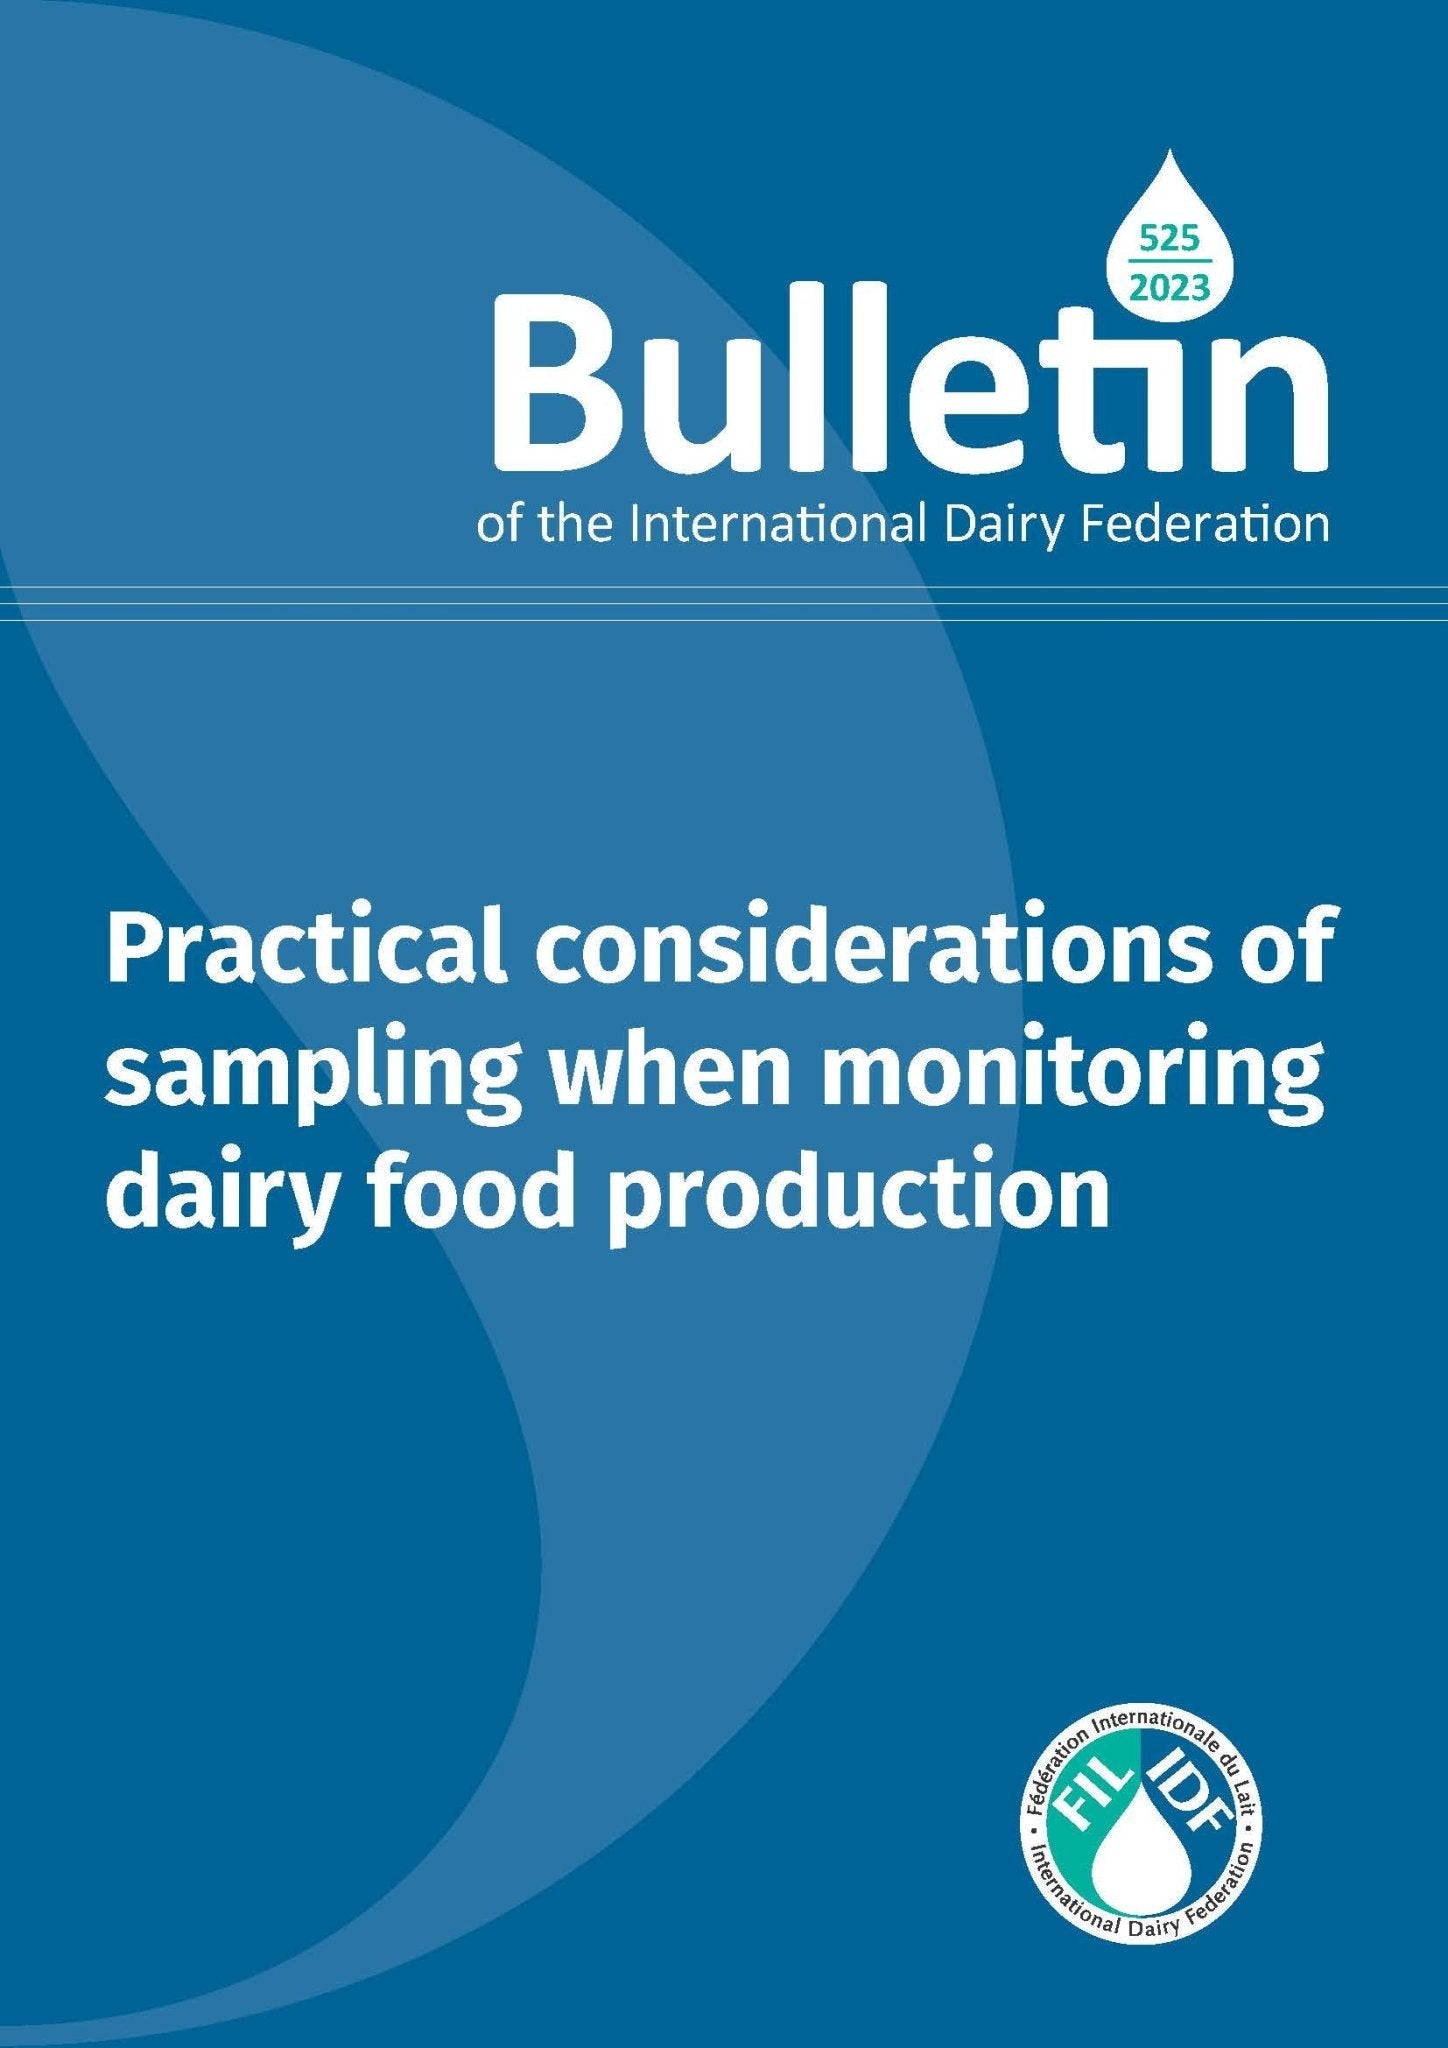 Bulletin of the IDF N° 525/2023: Practical considerations of sampling when monitoring dairy food production - FIL-IDF